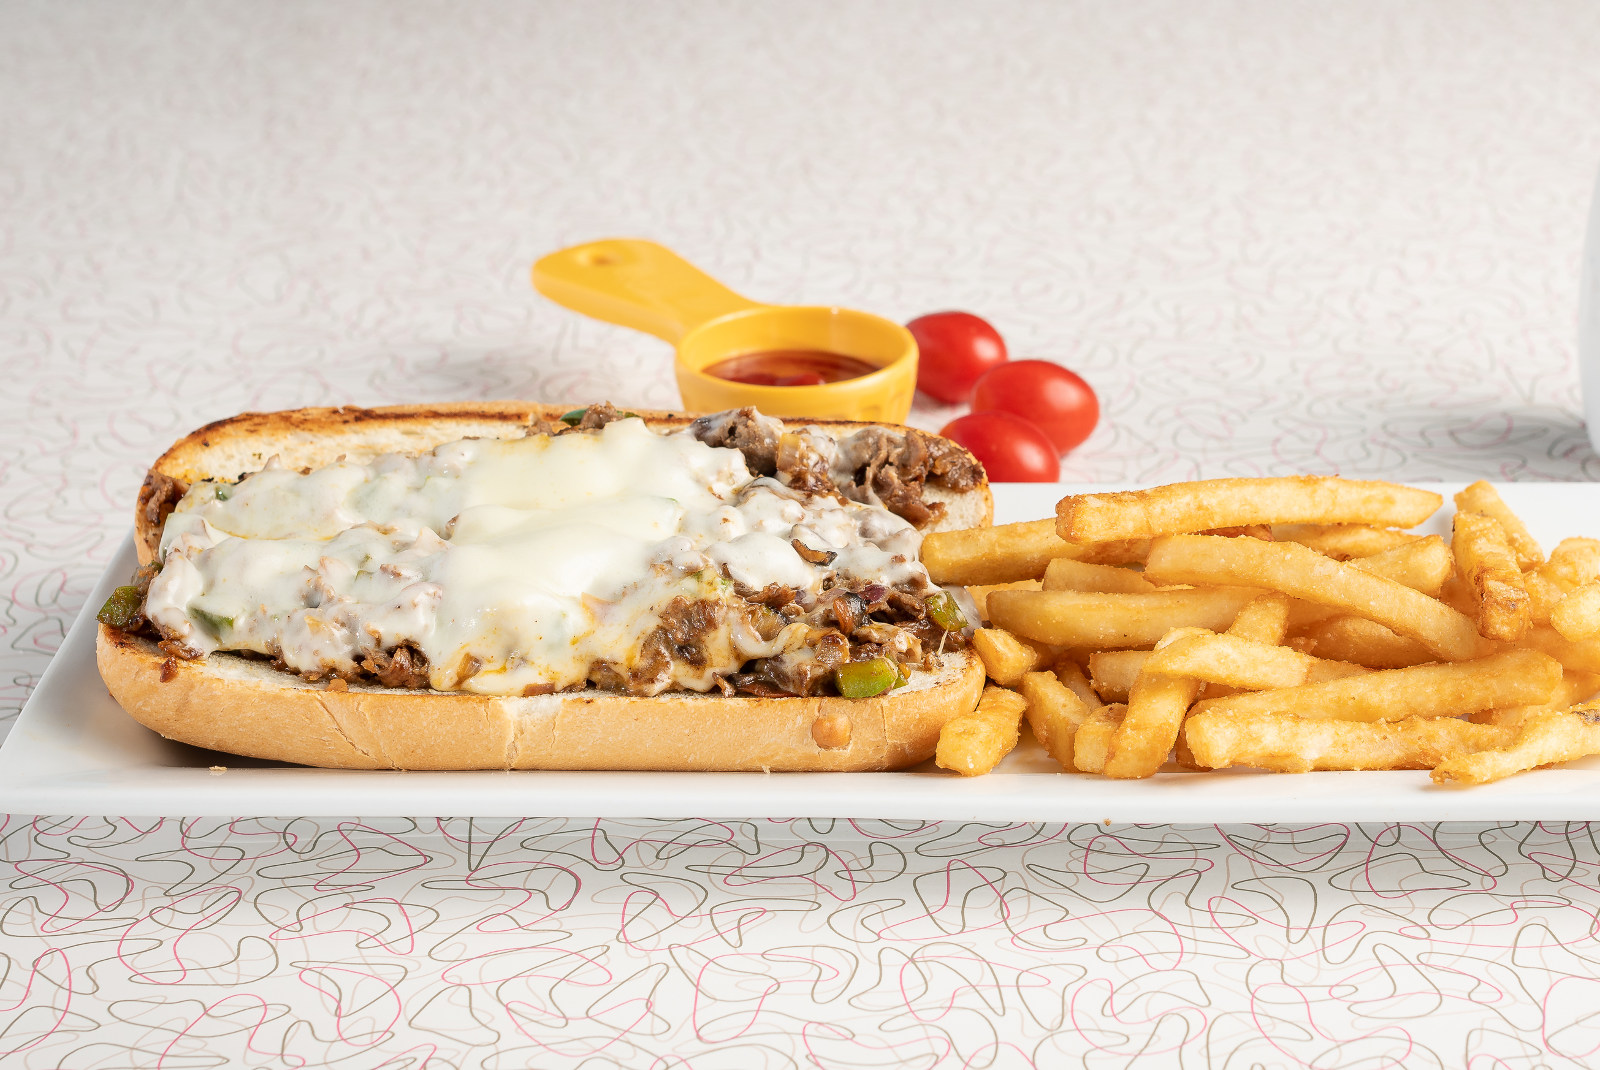 Philly Cheesesteak Meal